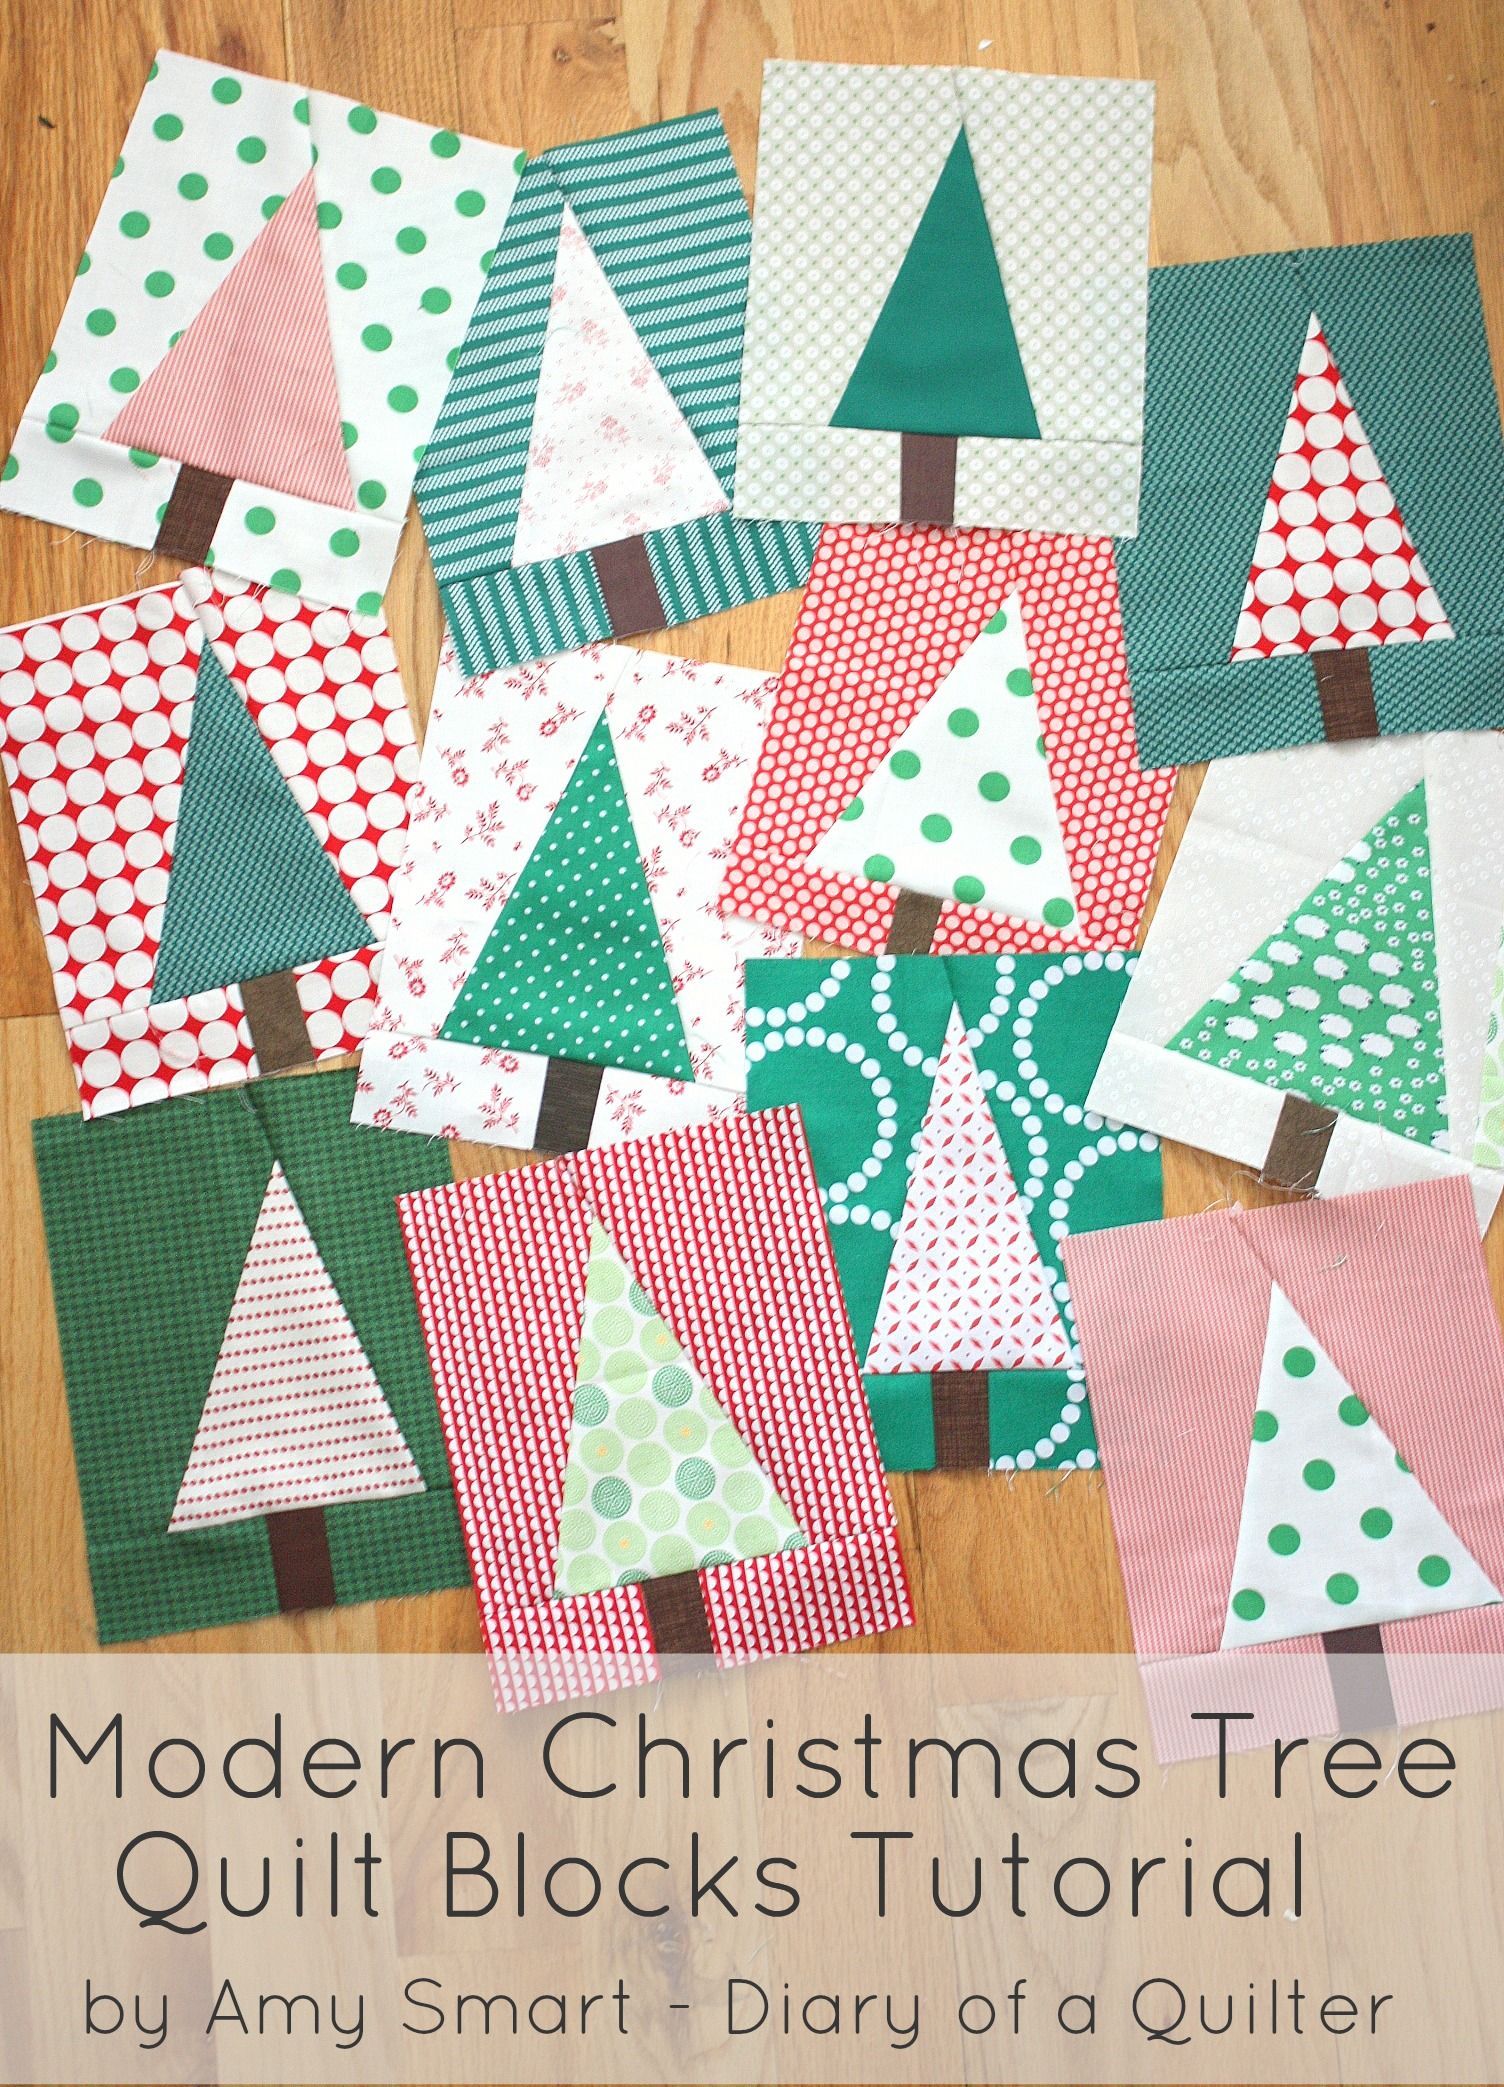 Christmas Tree Quilt Block Pattern Tutorial | Diary of a Quilter - a quilt blog -   14 fabric crafts Christmas quilt blocks ideas